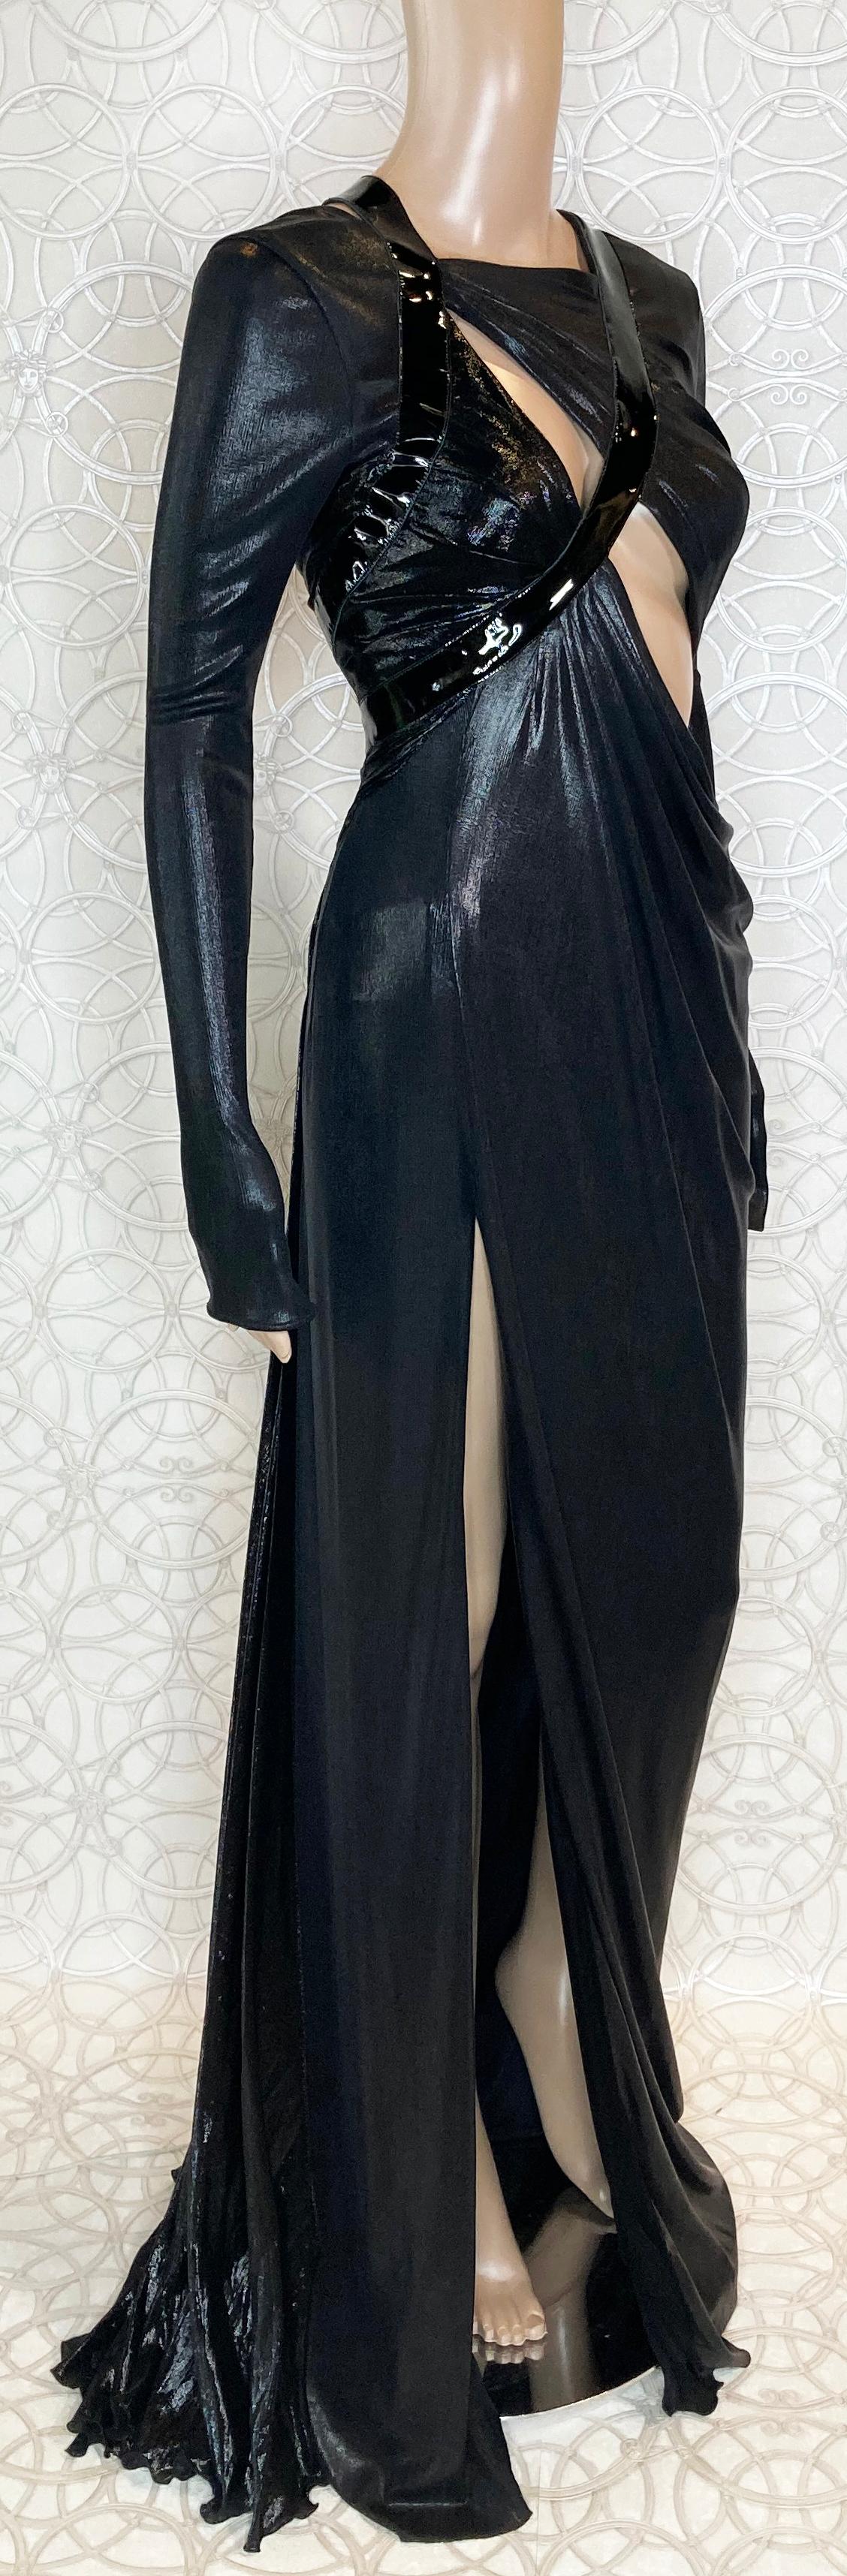 New VERSACE Hottest Black Liquid Jersey Gown With Vinyl Sleeves 8